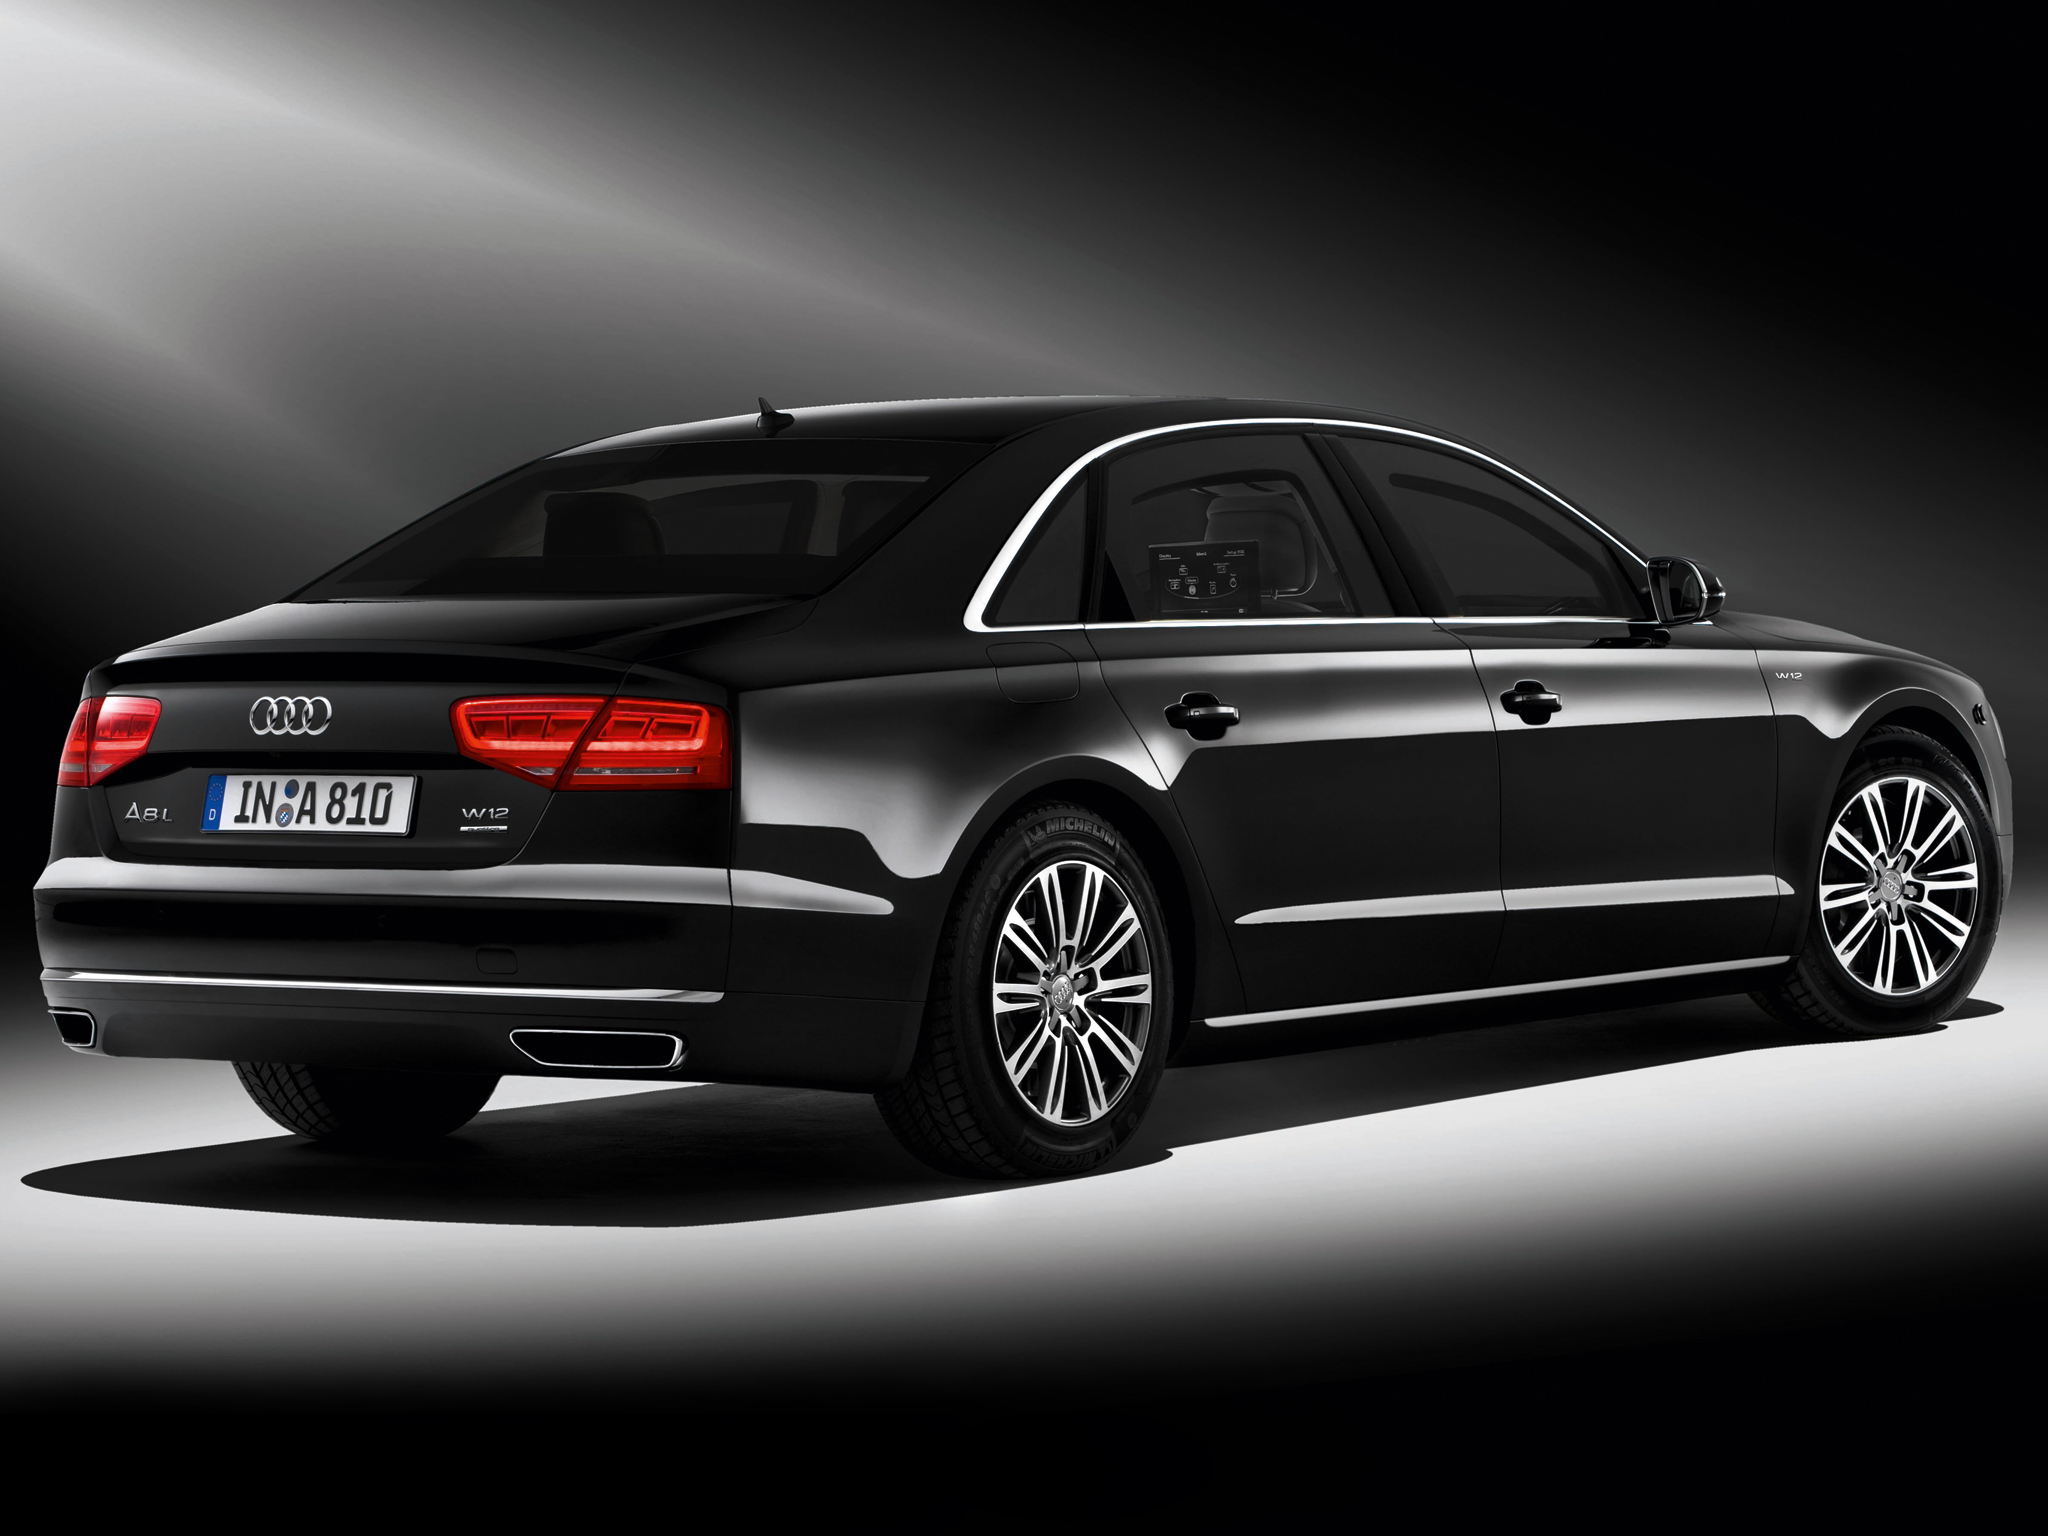 2011, Armored, Audi, A8l, W12, Security, D 4, Luxury Wallpaper